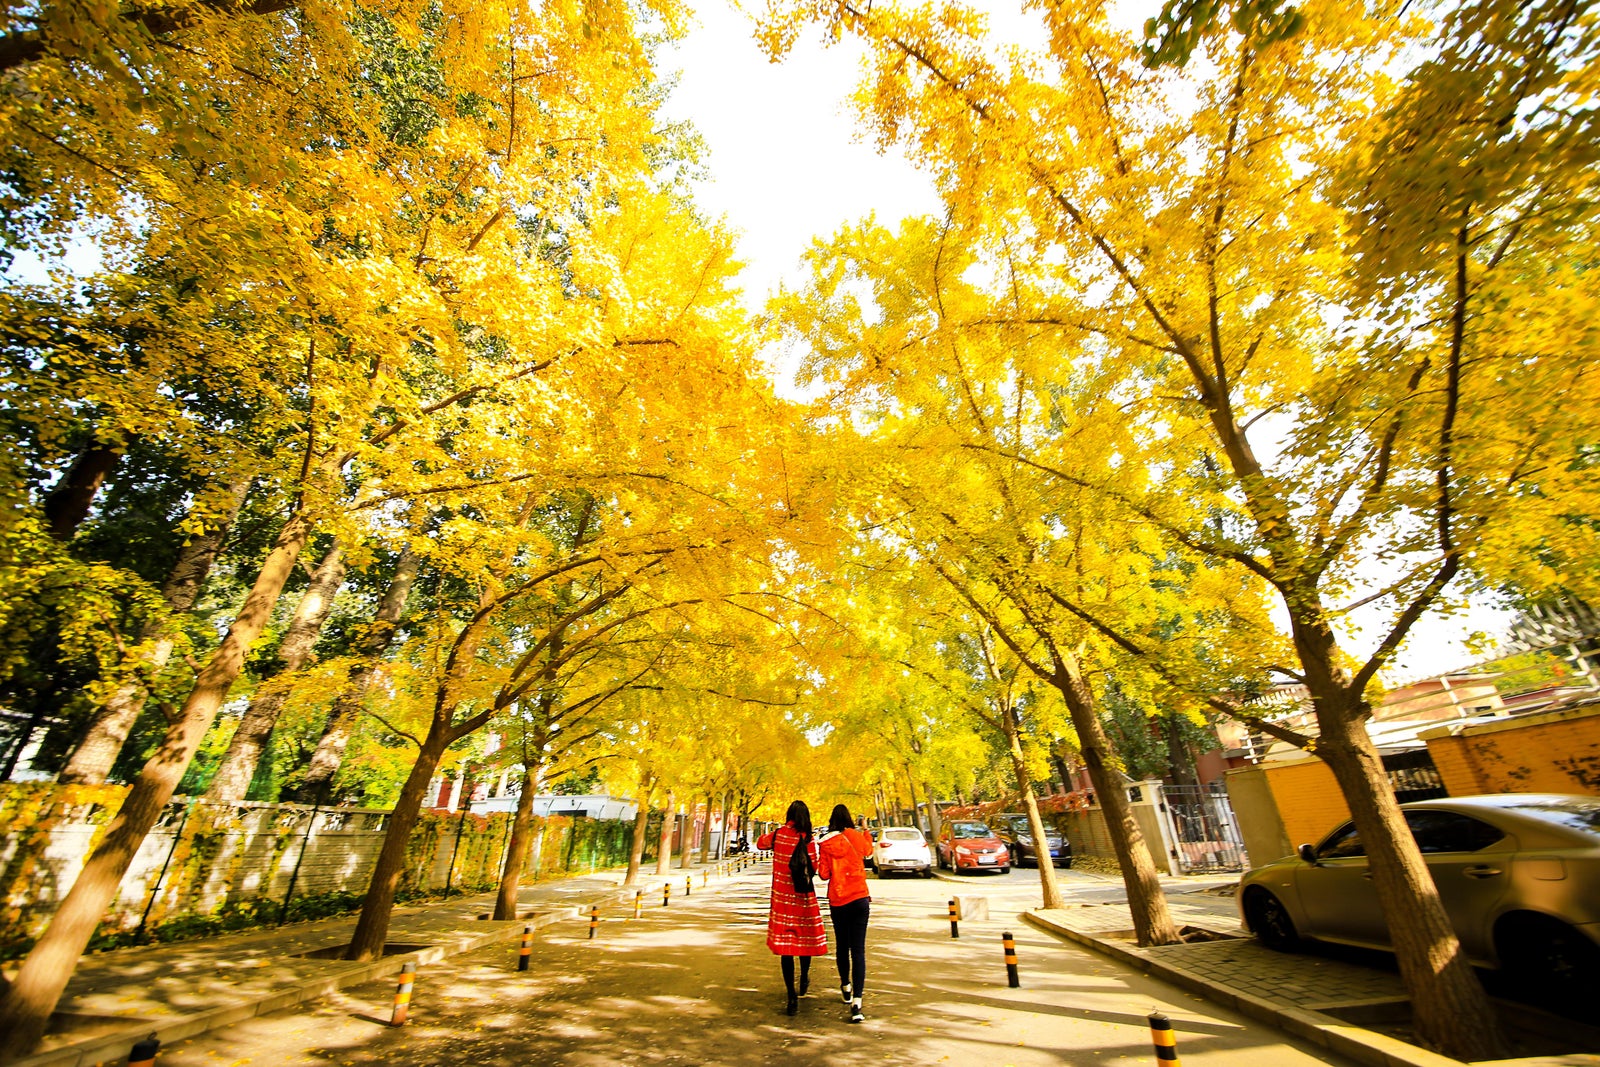 Climate change is keeping the leaves on the gingko longer every year.